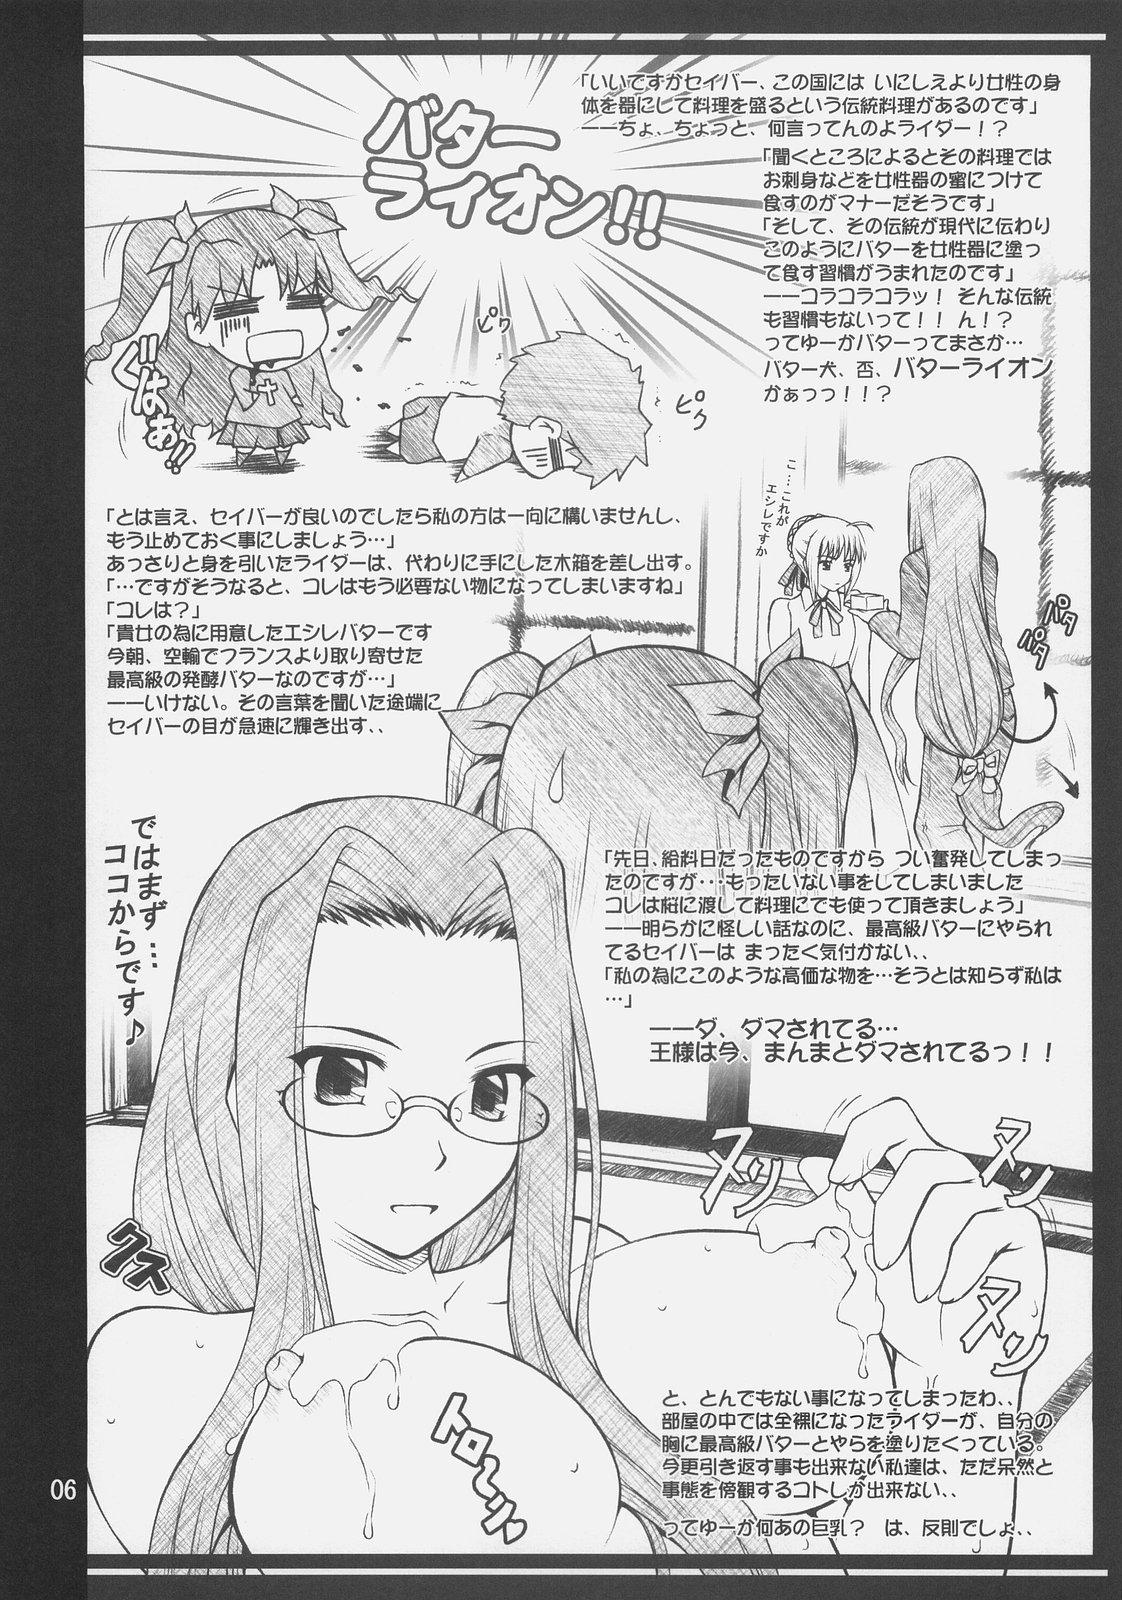 Face Sitting kopuhen - Fate stay night Stepson - Page 5